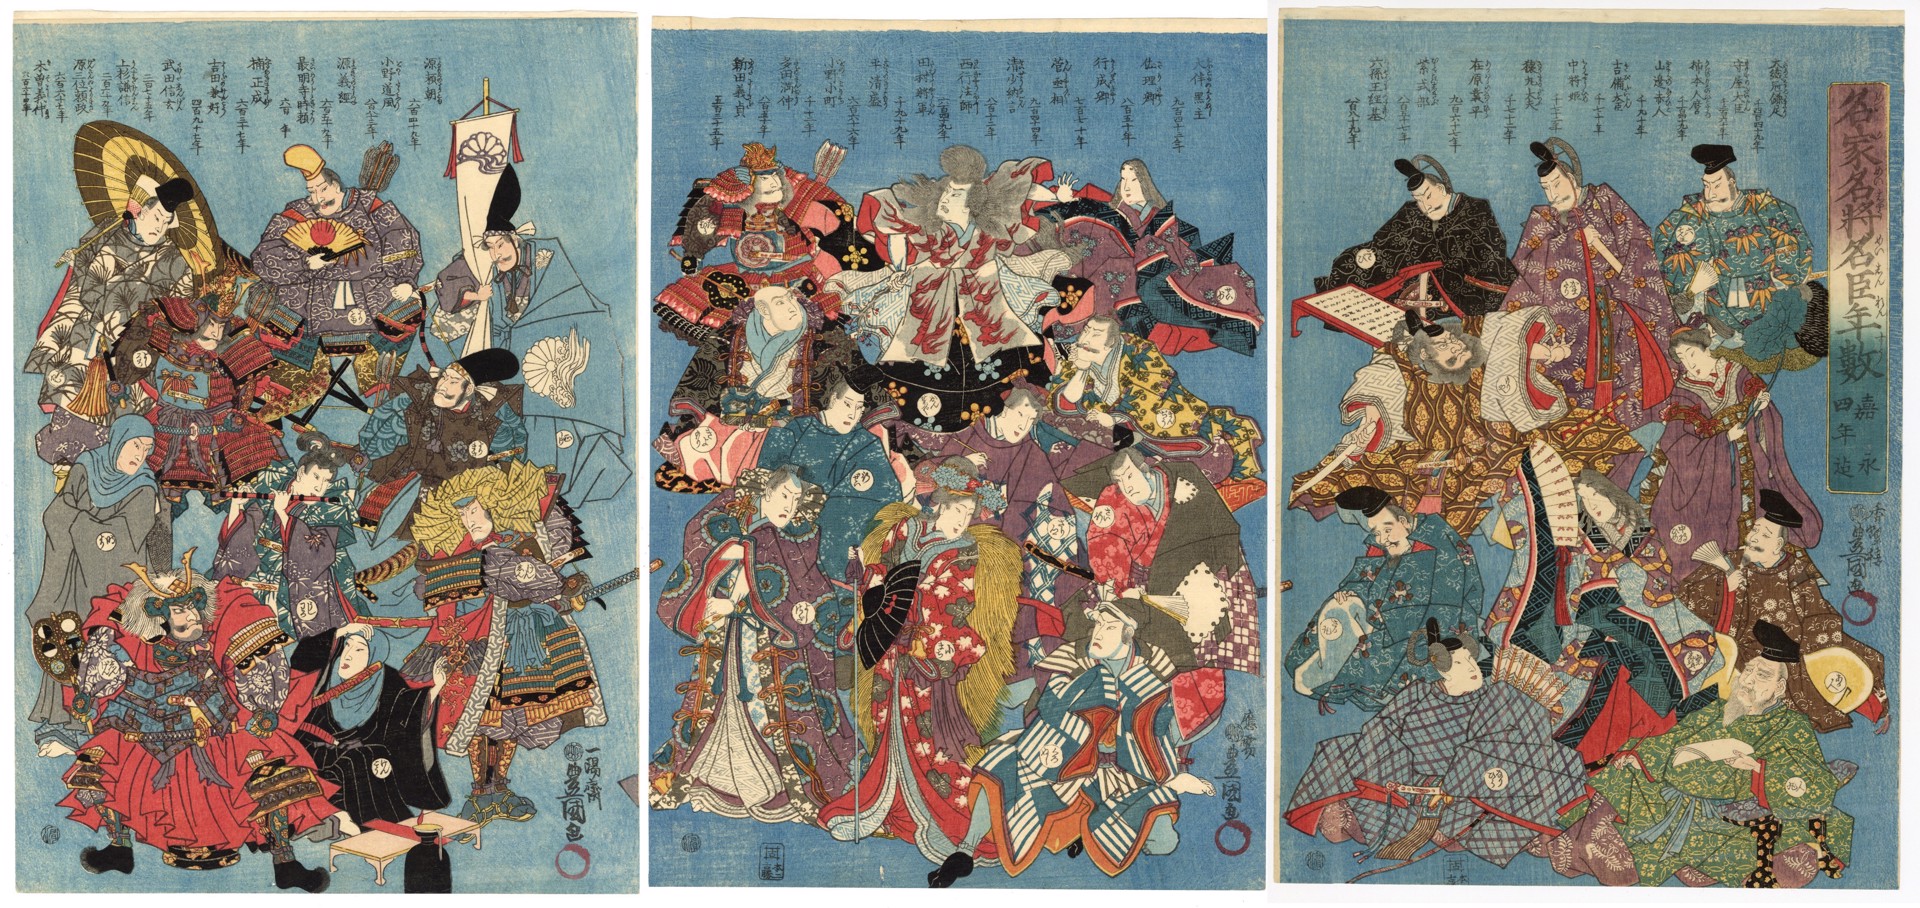 Famous Nobles, Generals and Retainers of Famous Families up to Kaei 4 (1851) by Kunisada